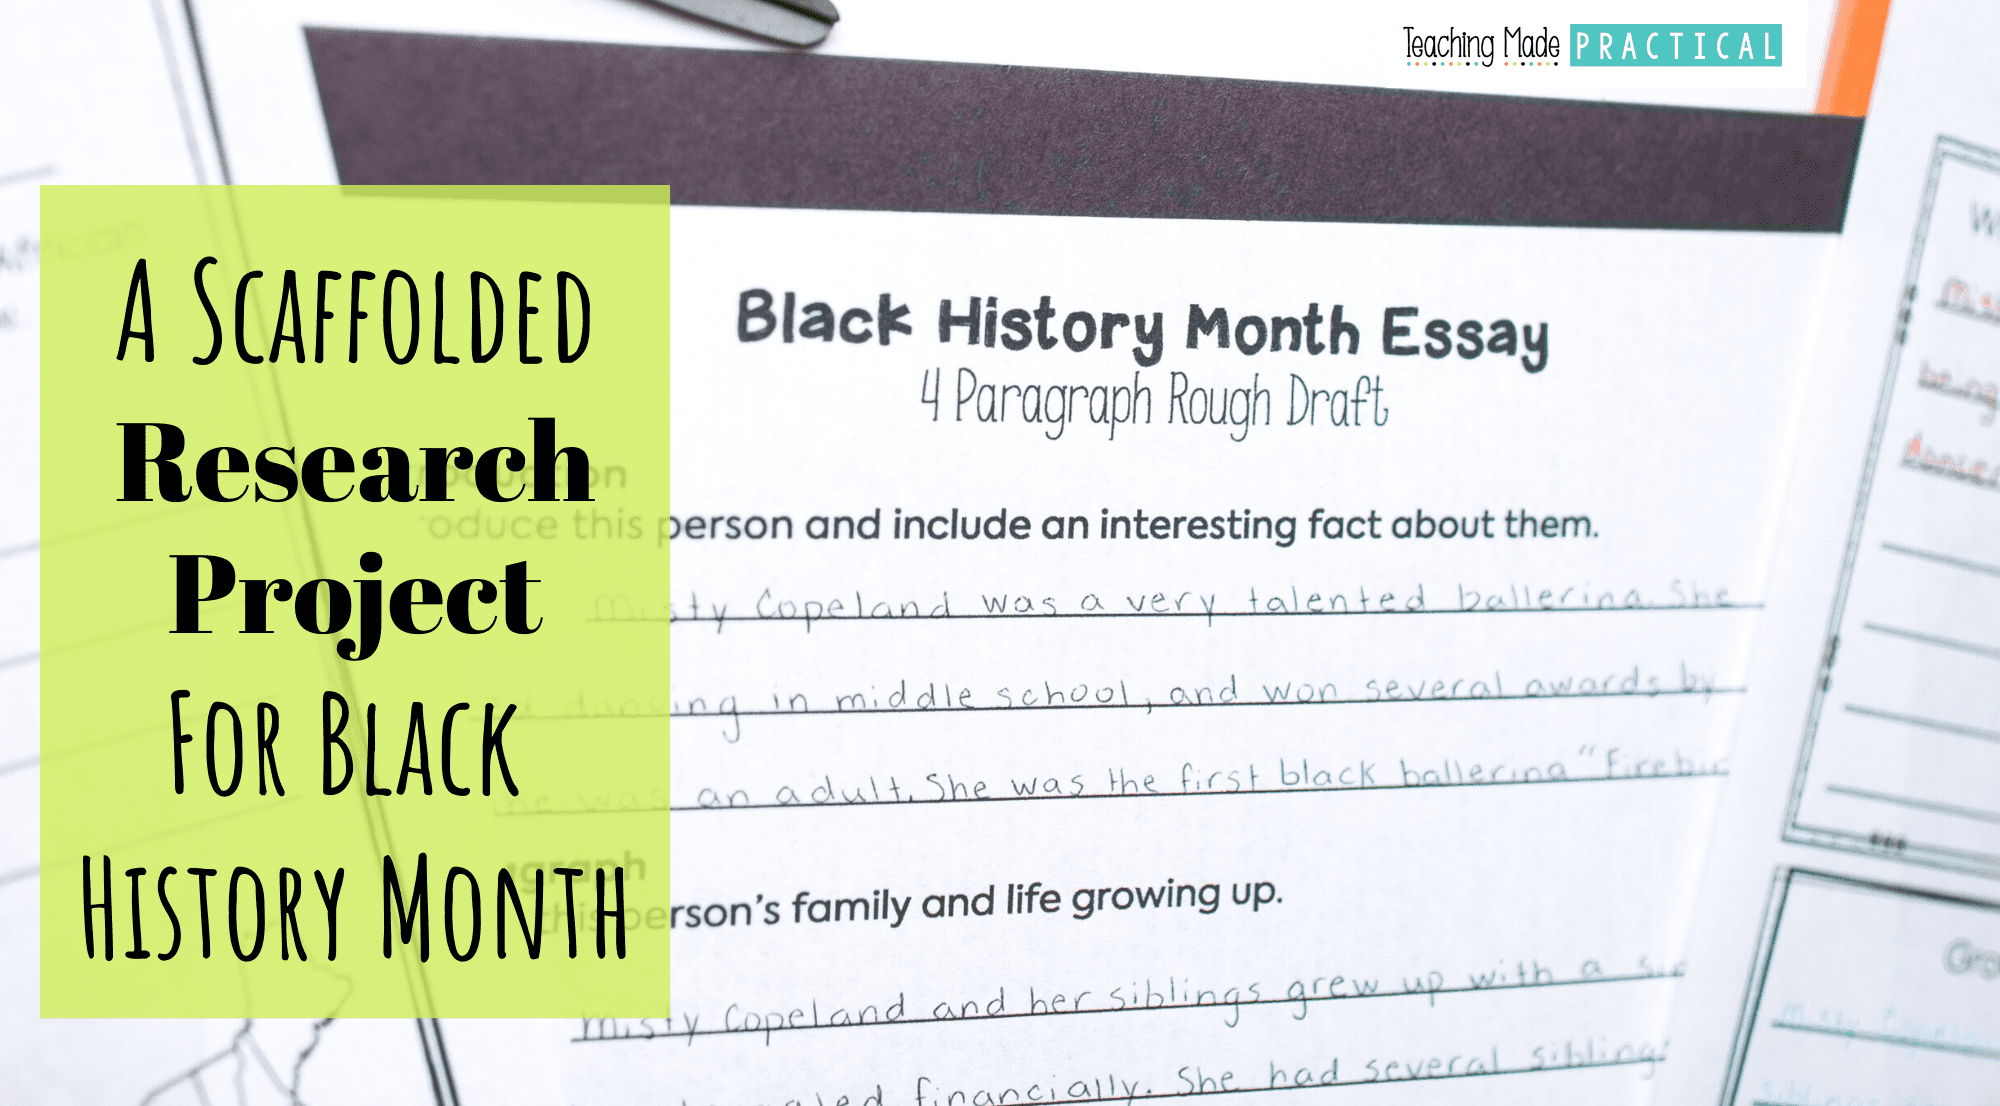 How to help your upper elementary students successfully complete a Black History Month Research Project